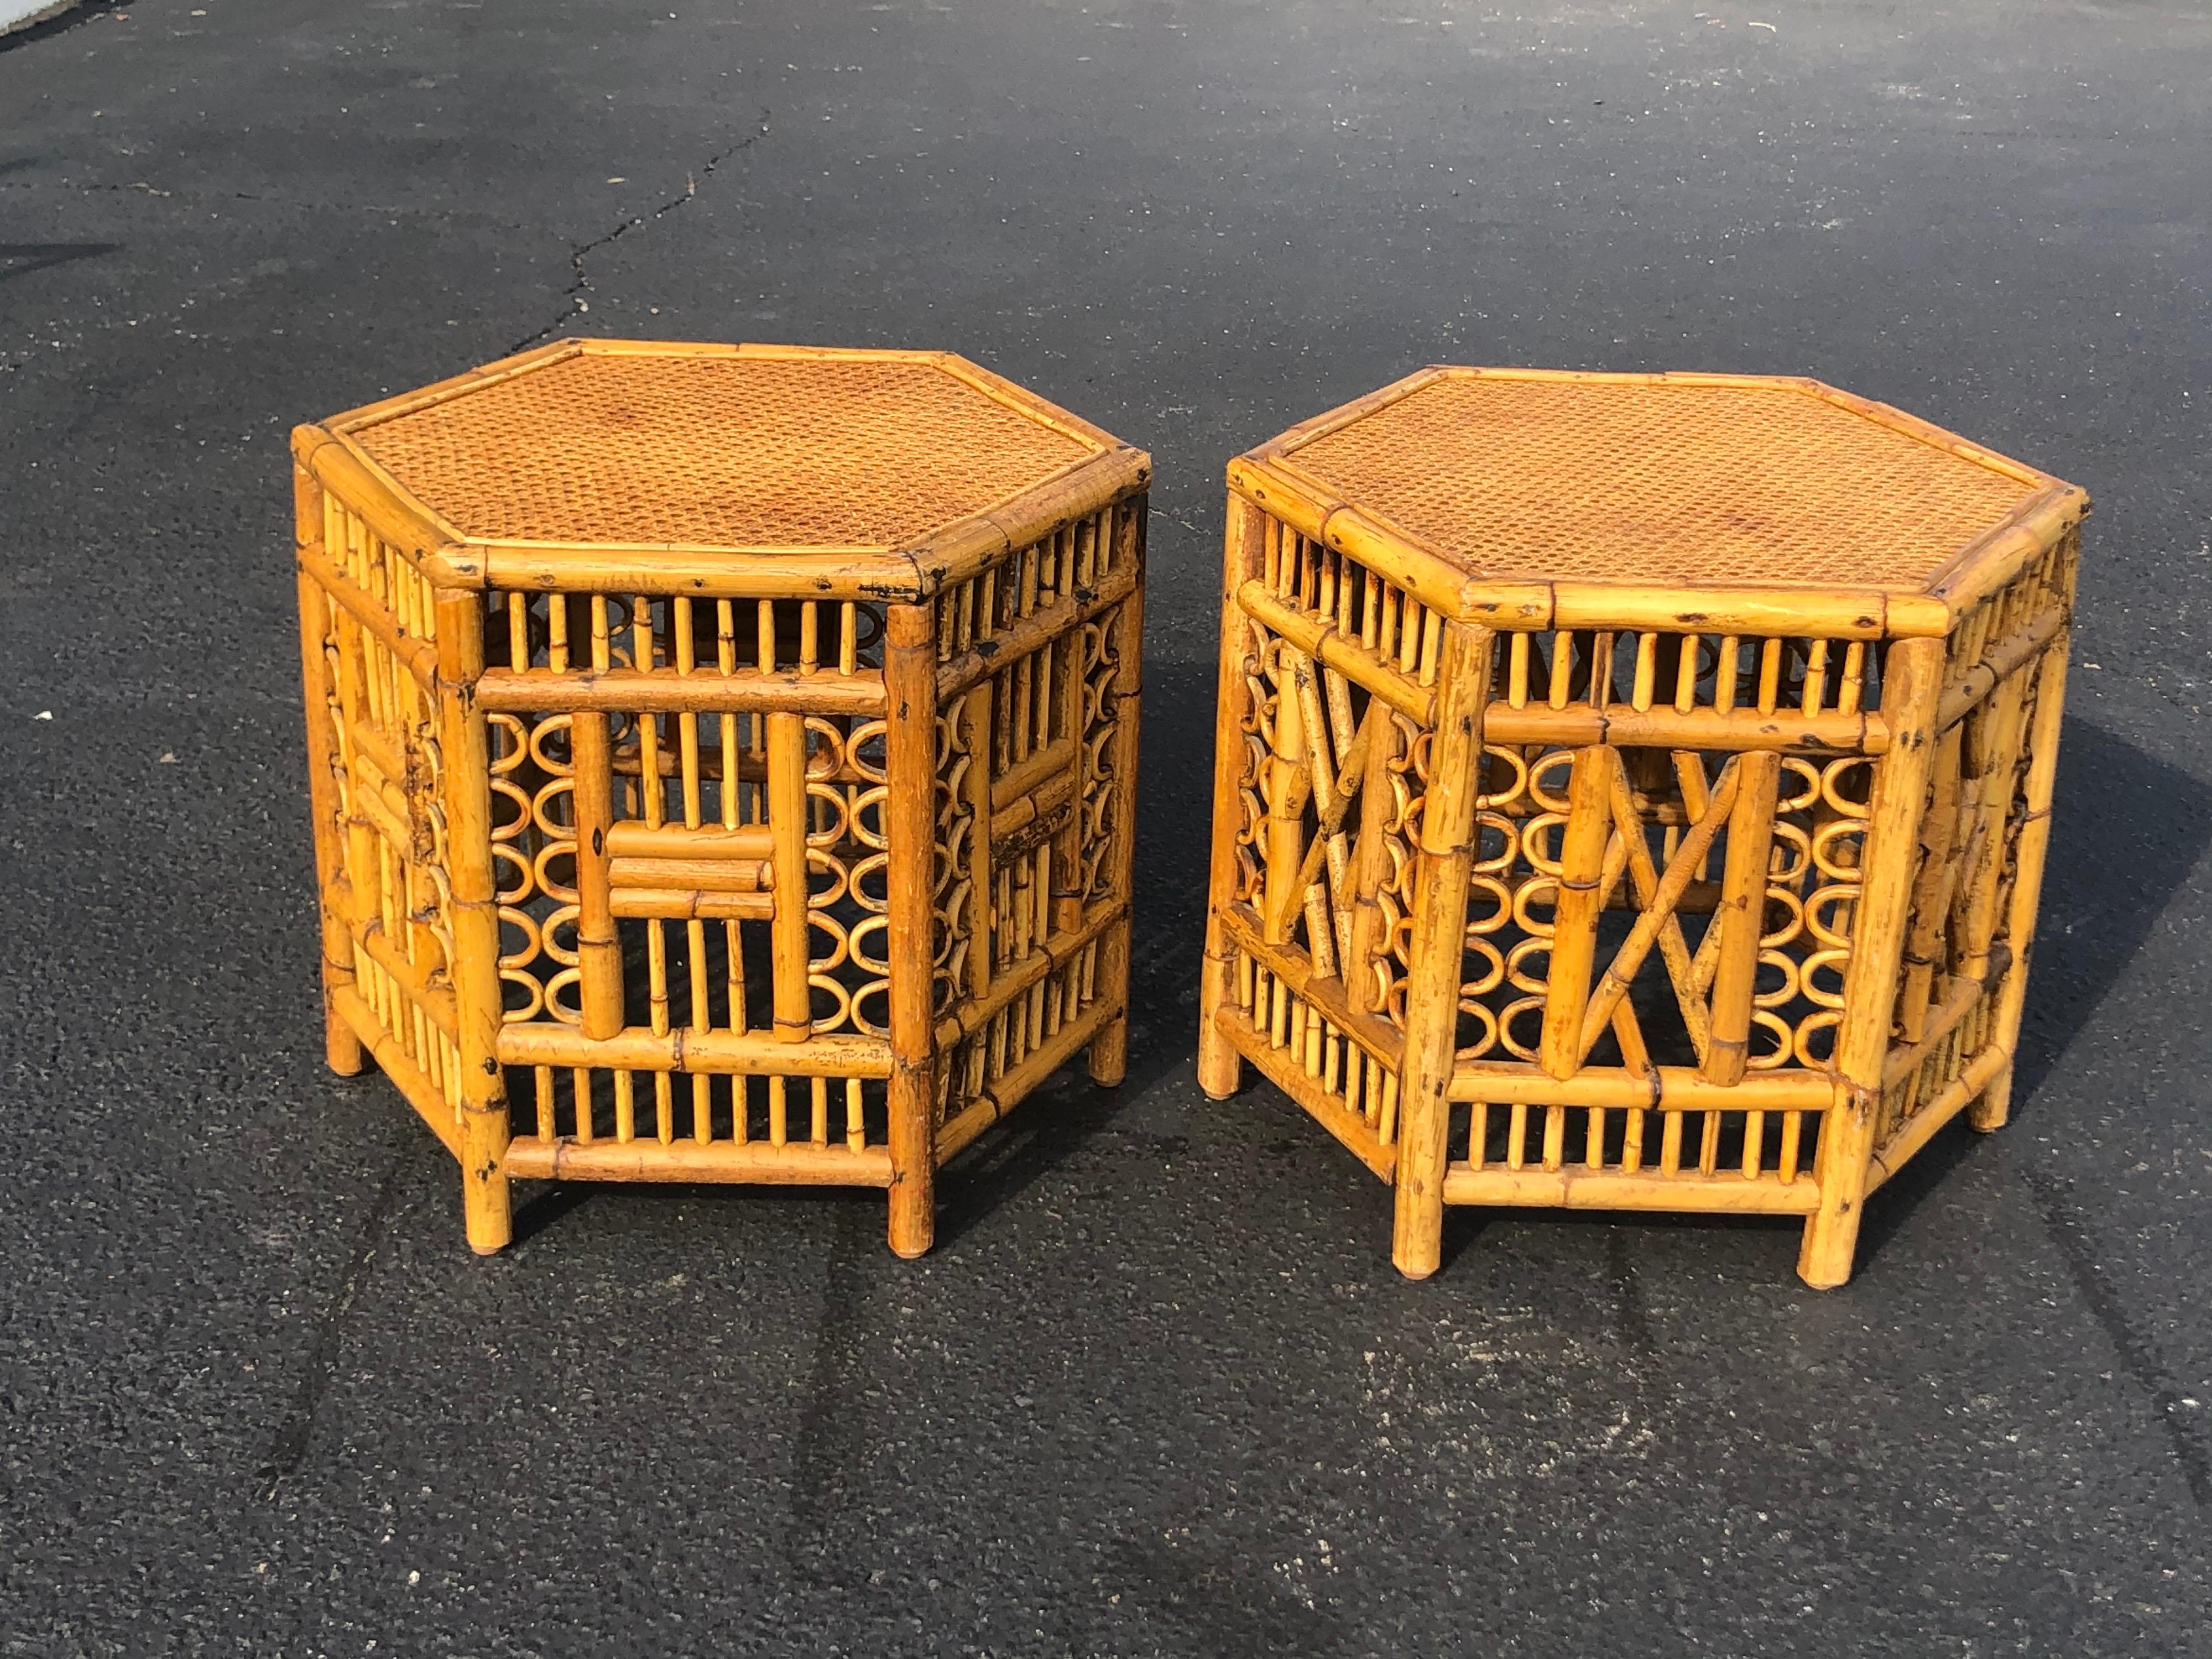 Pair of vintage Brighton style bamboo tables. These are identical in size but they vary in pattern. They are not matching tables. Please look at photos closely. Stron quality. Wicker table top over solid wood. Signed Calif-Asia underneath, from the